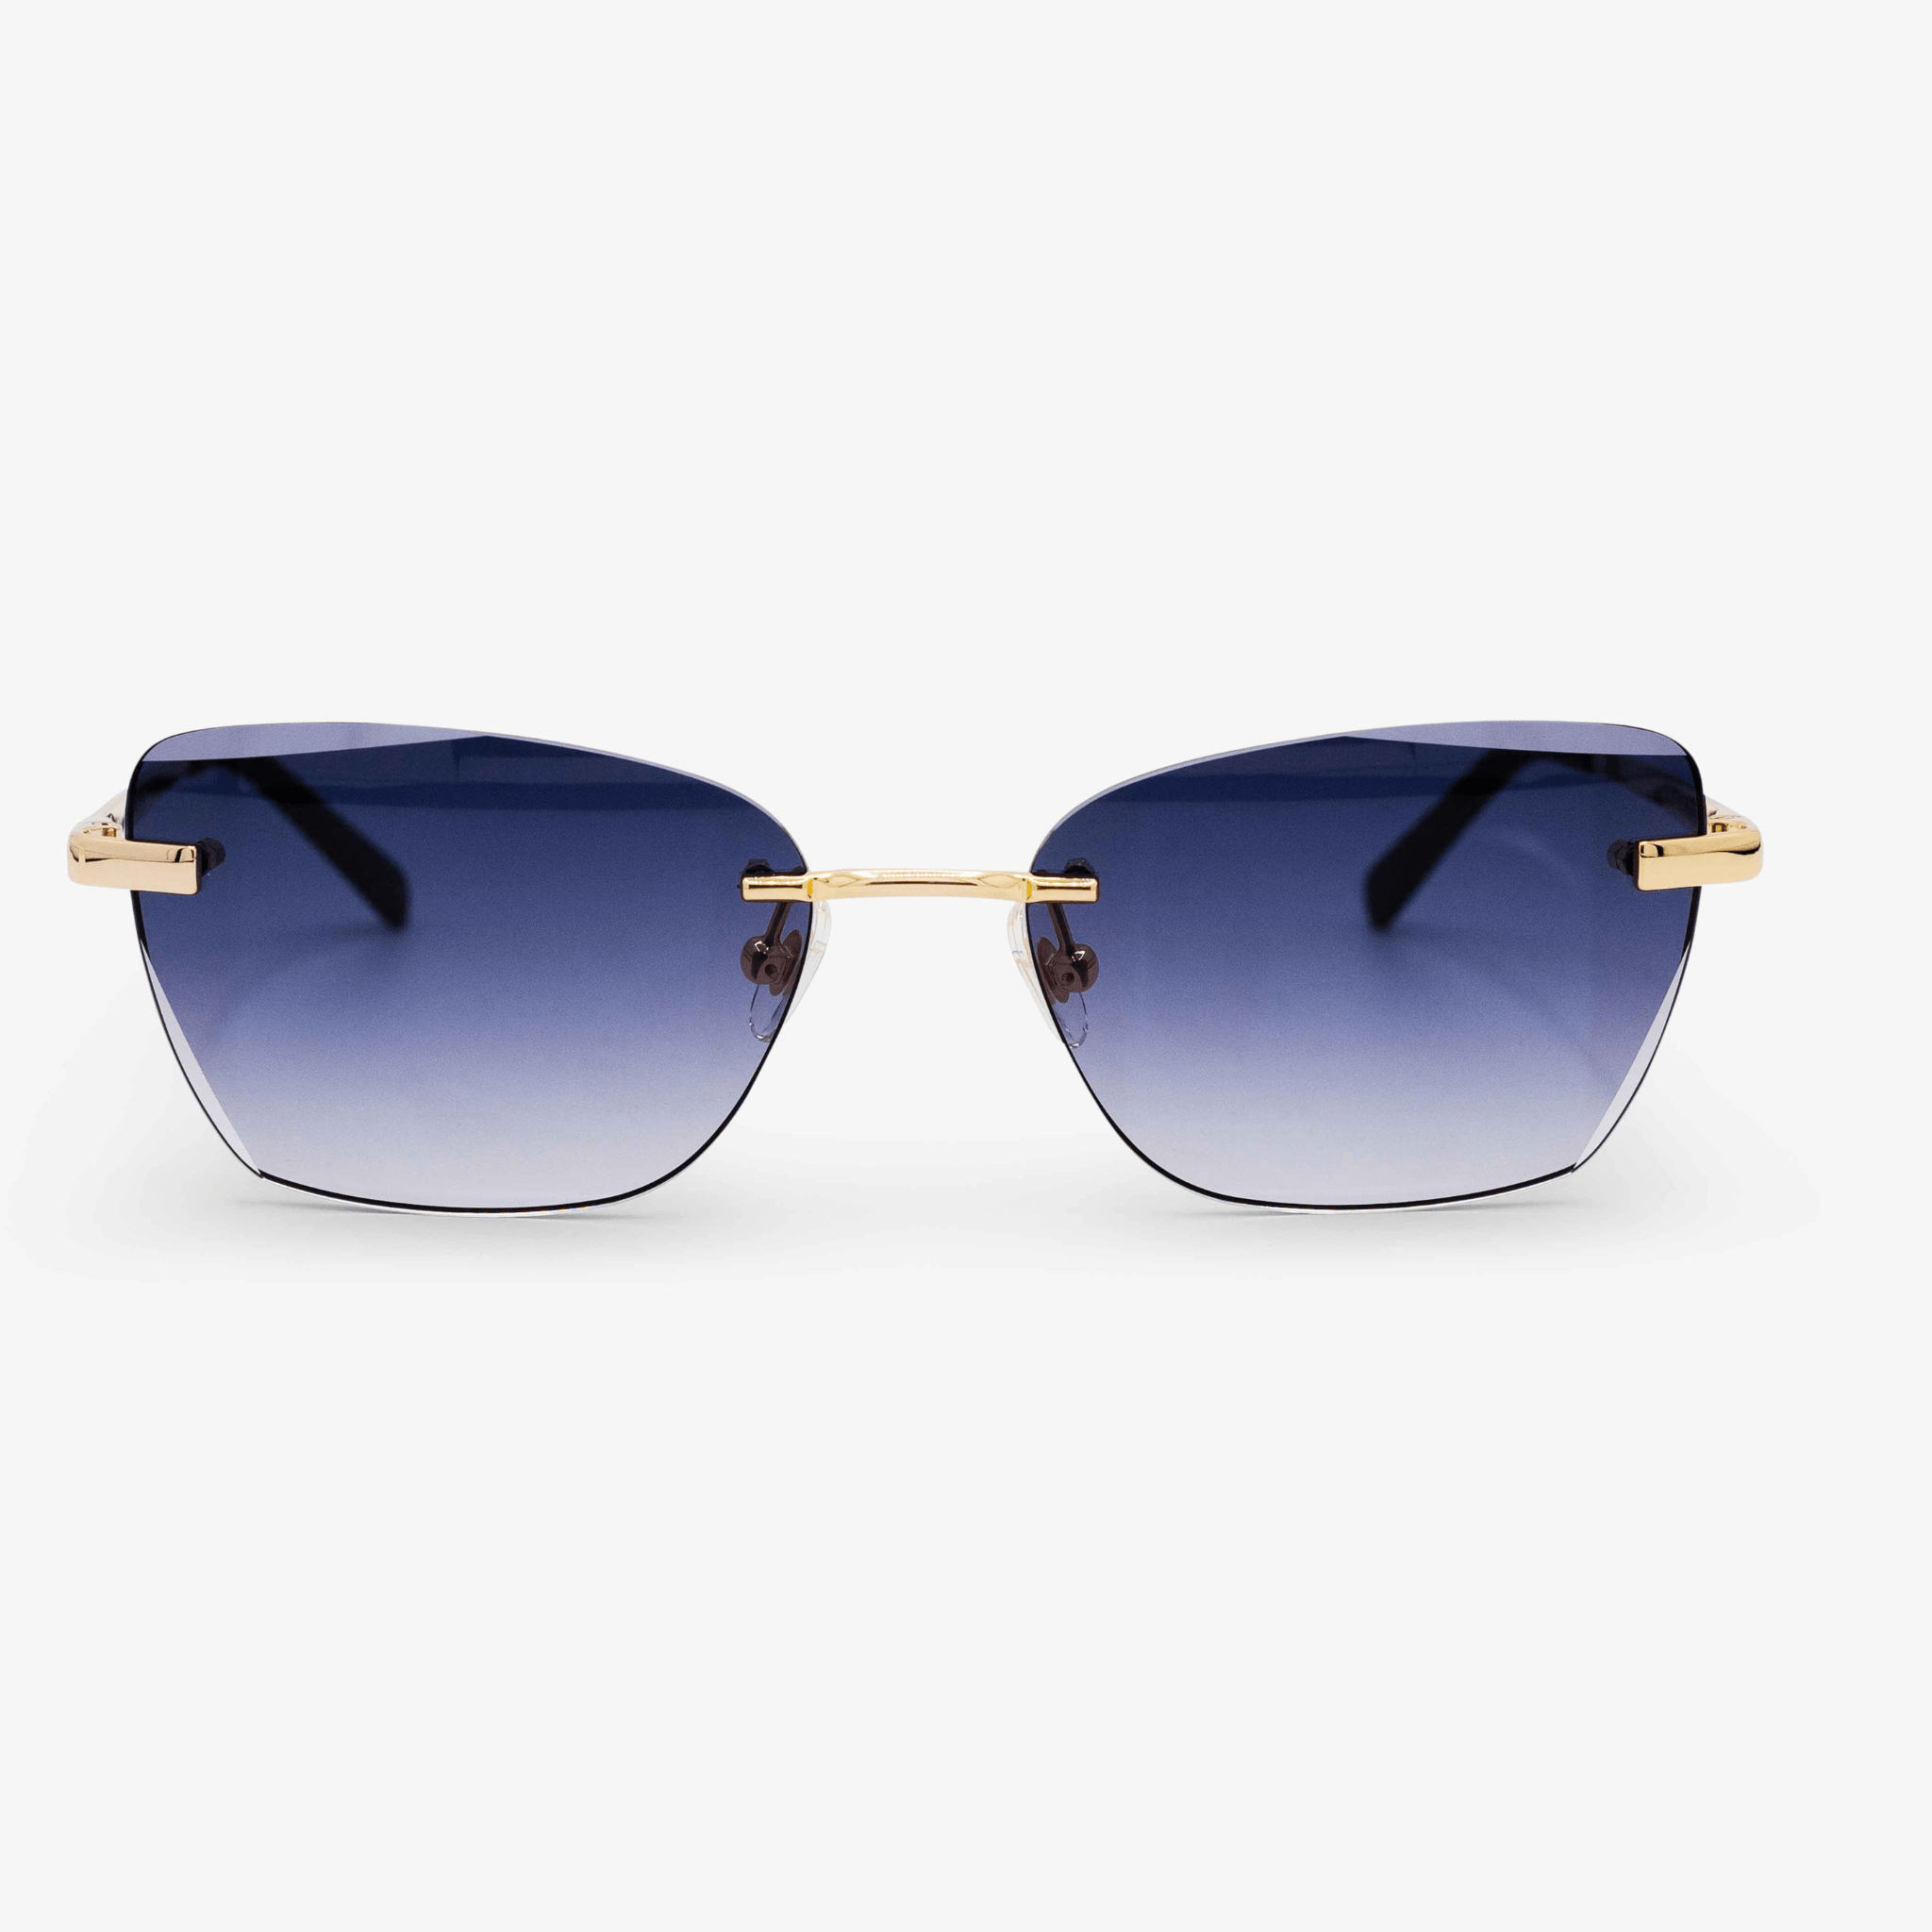 The 'Diva' model sunglasses in gradient grey offer a harmonious blend of style and sophistication. These rimless, rectangular-shaped lenses transition smoothly from a darker shade at the top to a lighter grey at the bottom, complemented by the subtle sheen of 18k gold details on the bridge and temples.